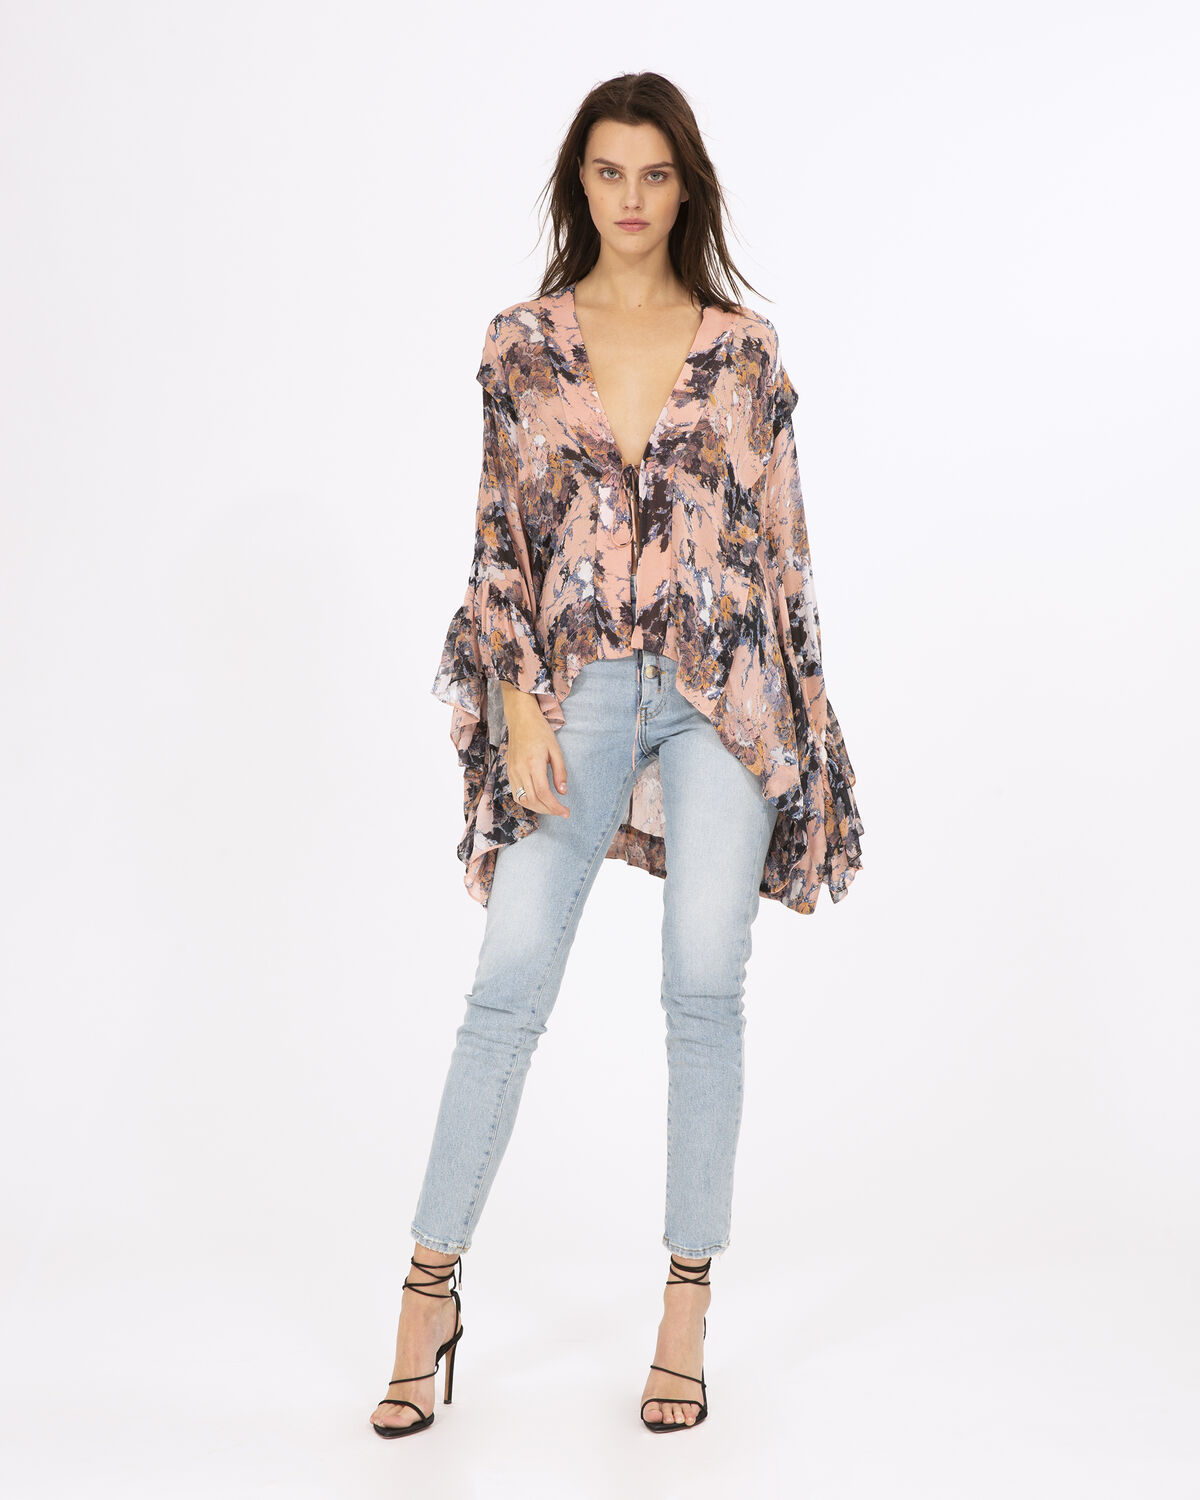 Photo of IRO Paris Ideal Top Nude - This Oversized Top Is The Piece To Have This Season. Kimono Sleeves, Colorful Print, Deep Neckline: This Is A Top That Will Enhance You! Shirts-Tops